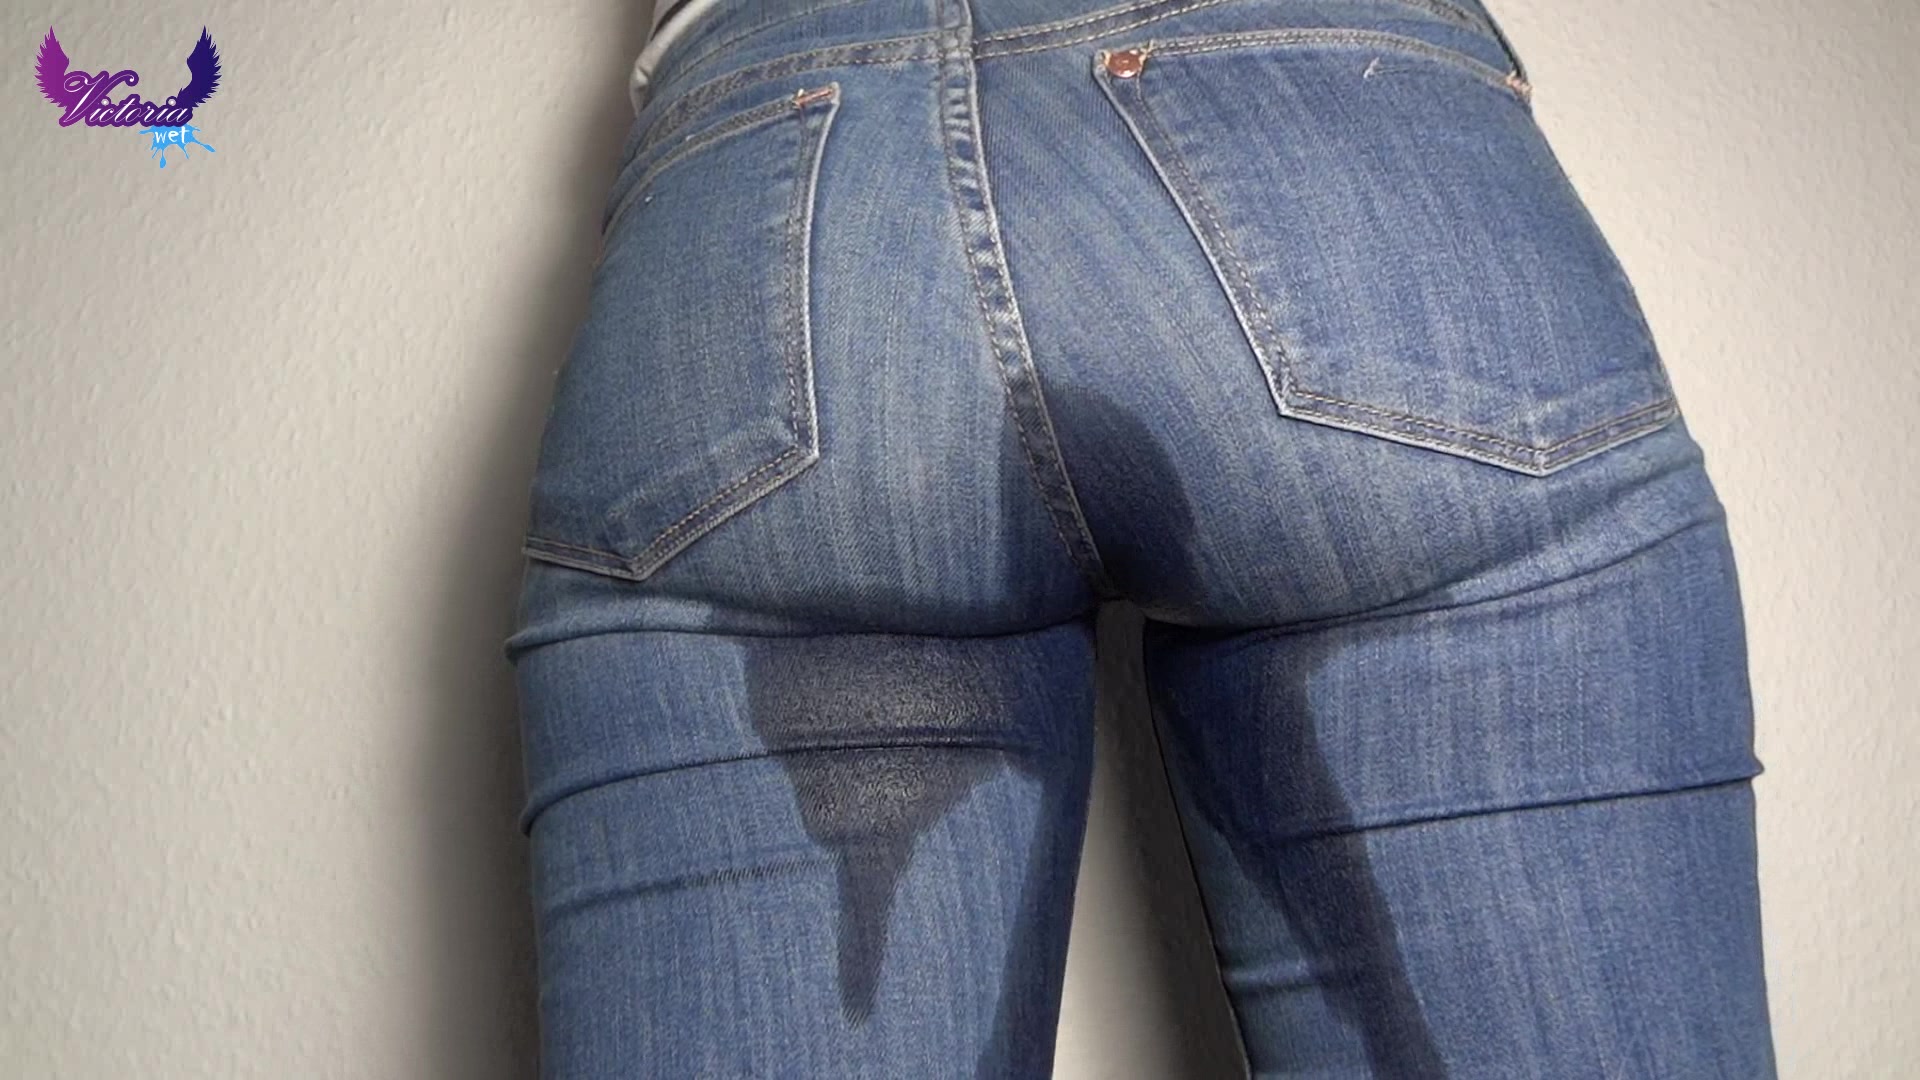 Wet her jeans